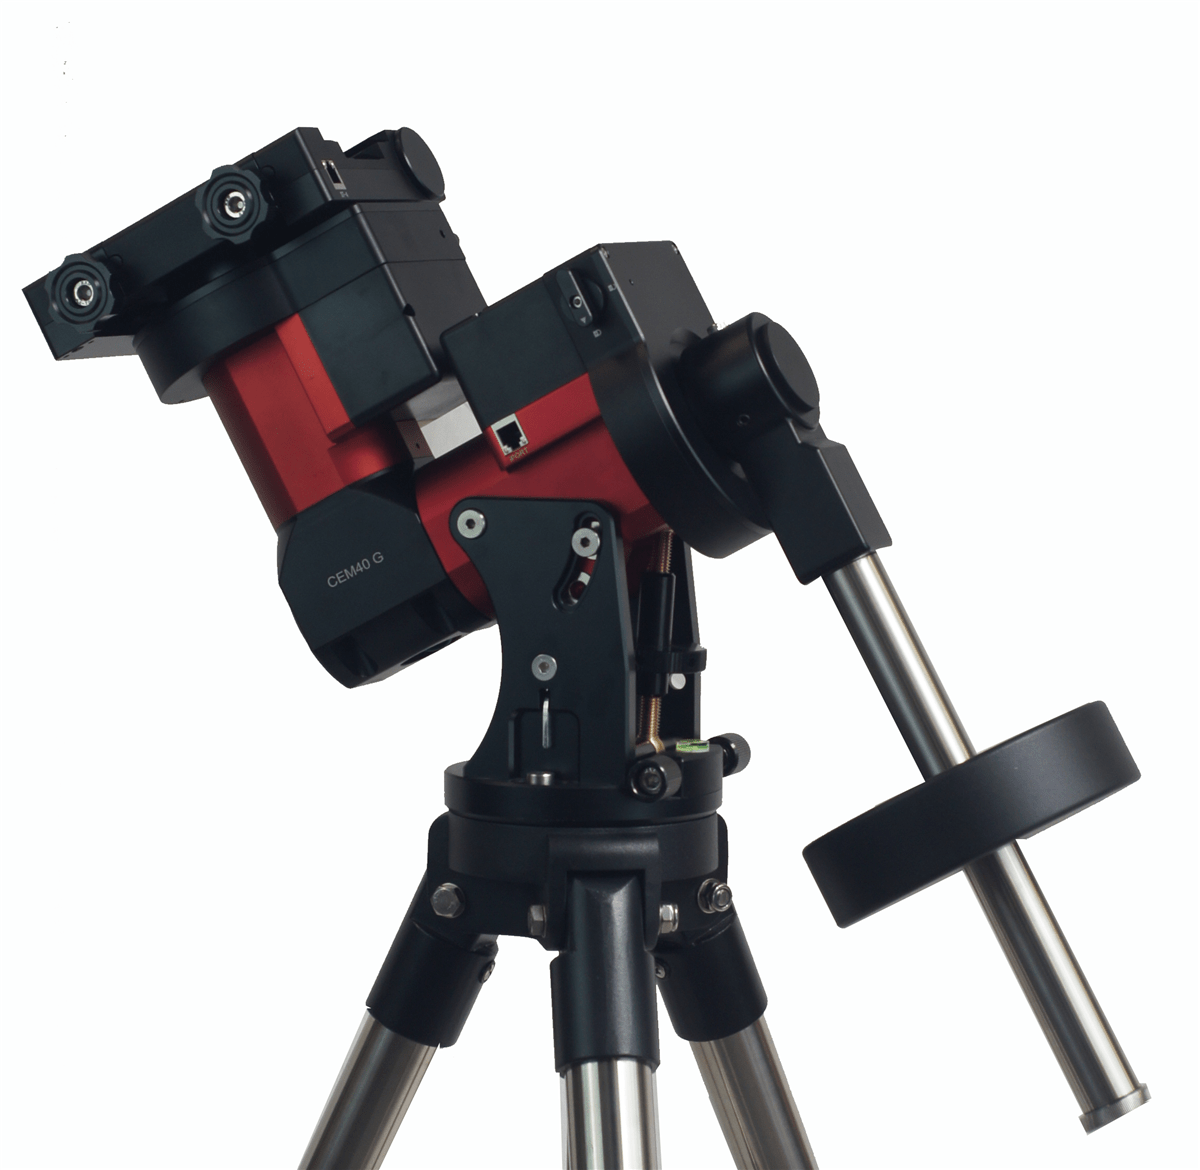 iOptron Mount iOptron C402A CEM40 with iPolar, Case, 7623 LiteRoc Tripod and 8027 Counterweight - C402A3